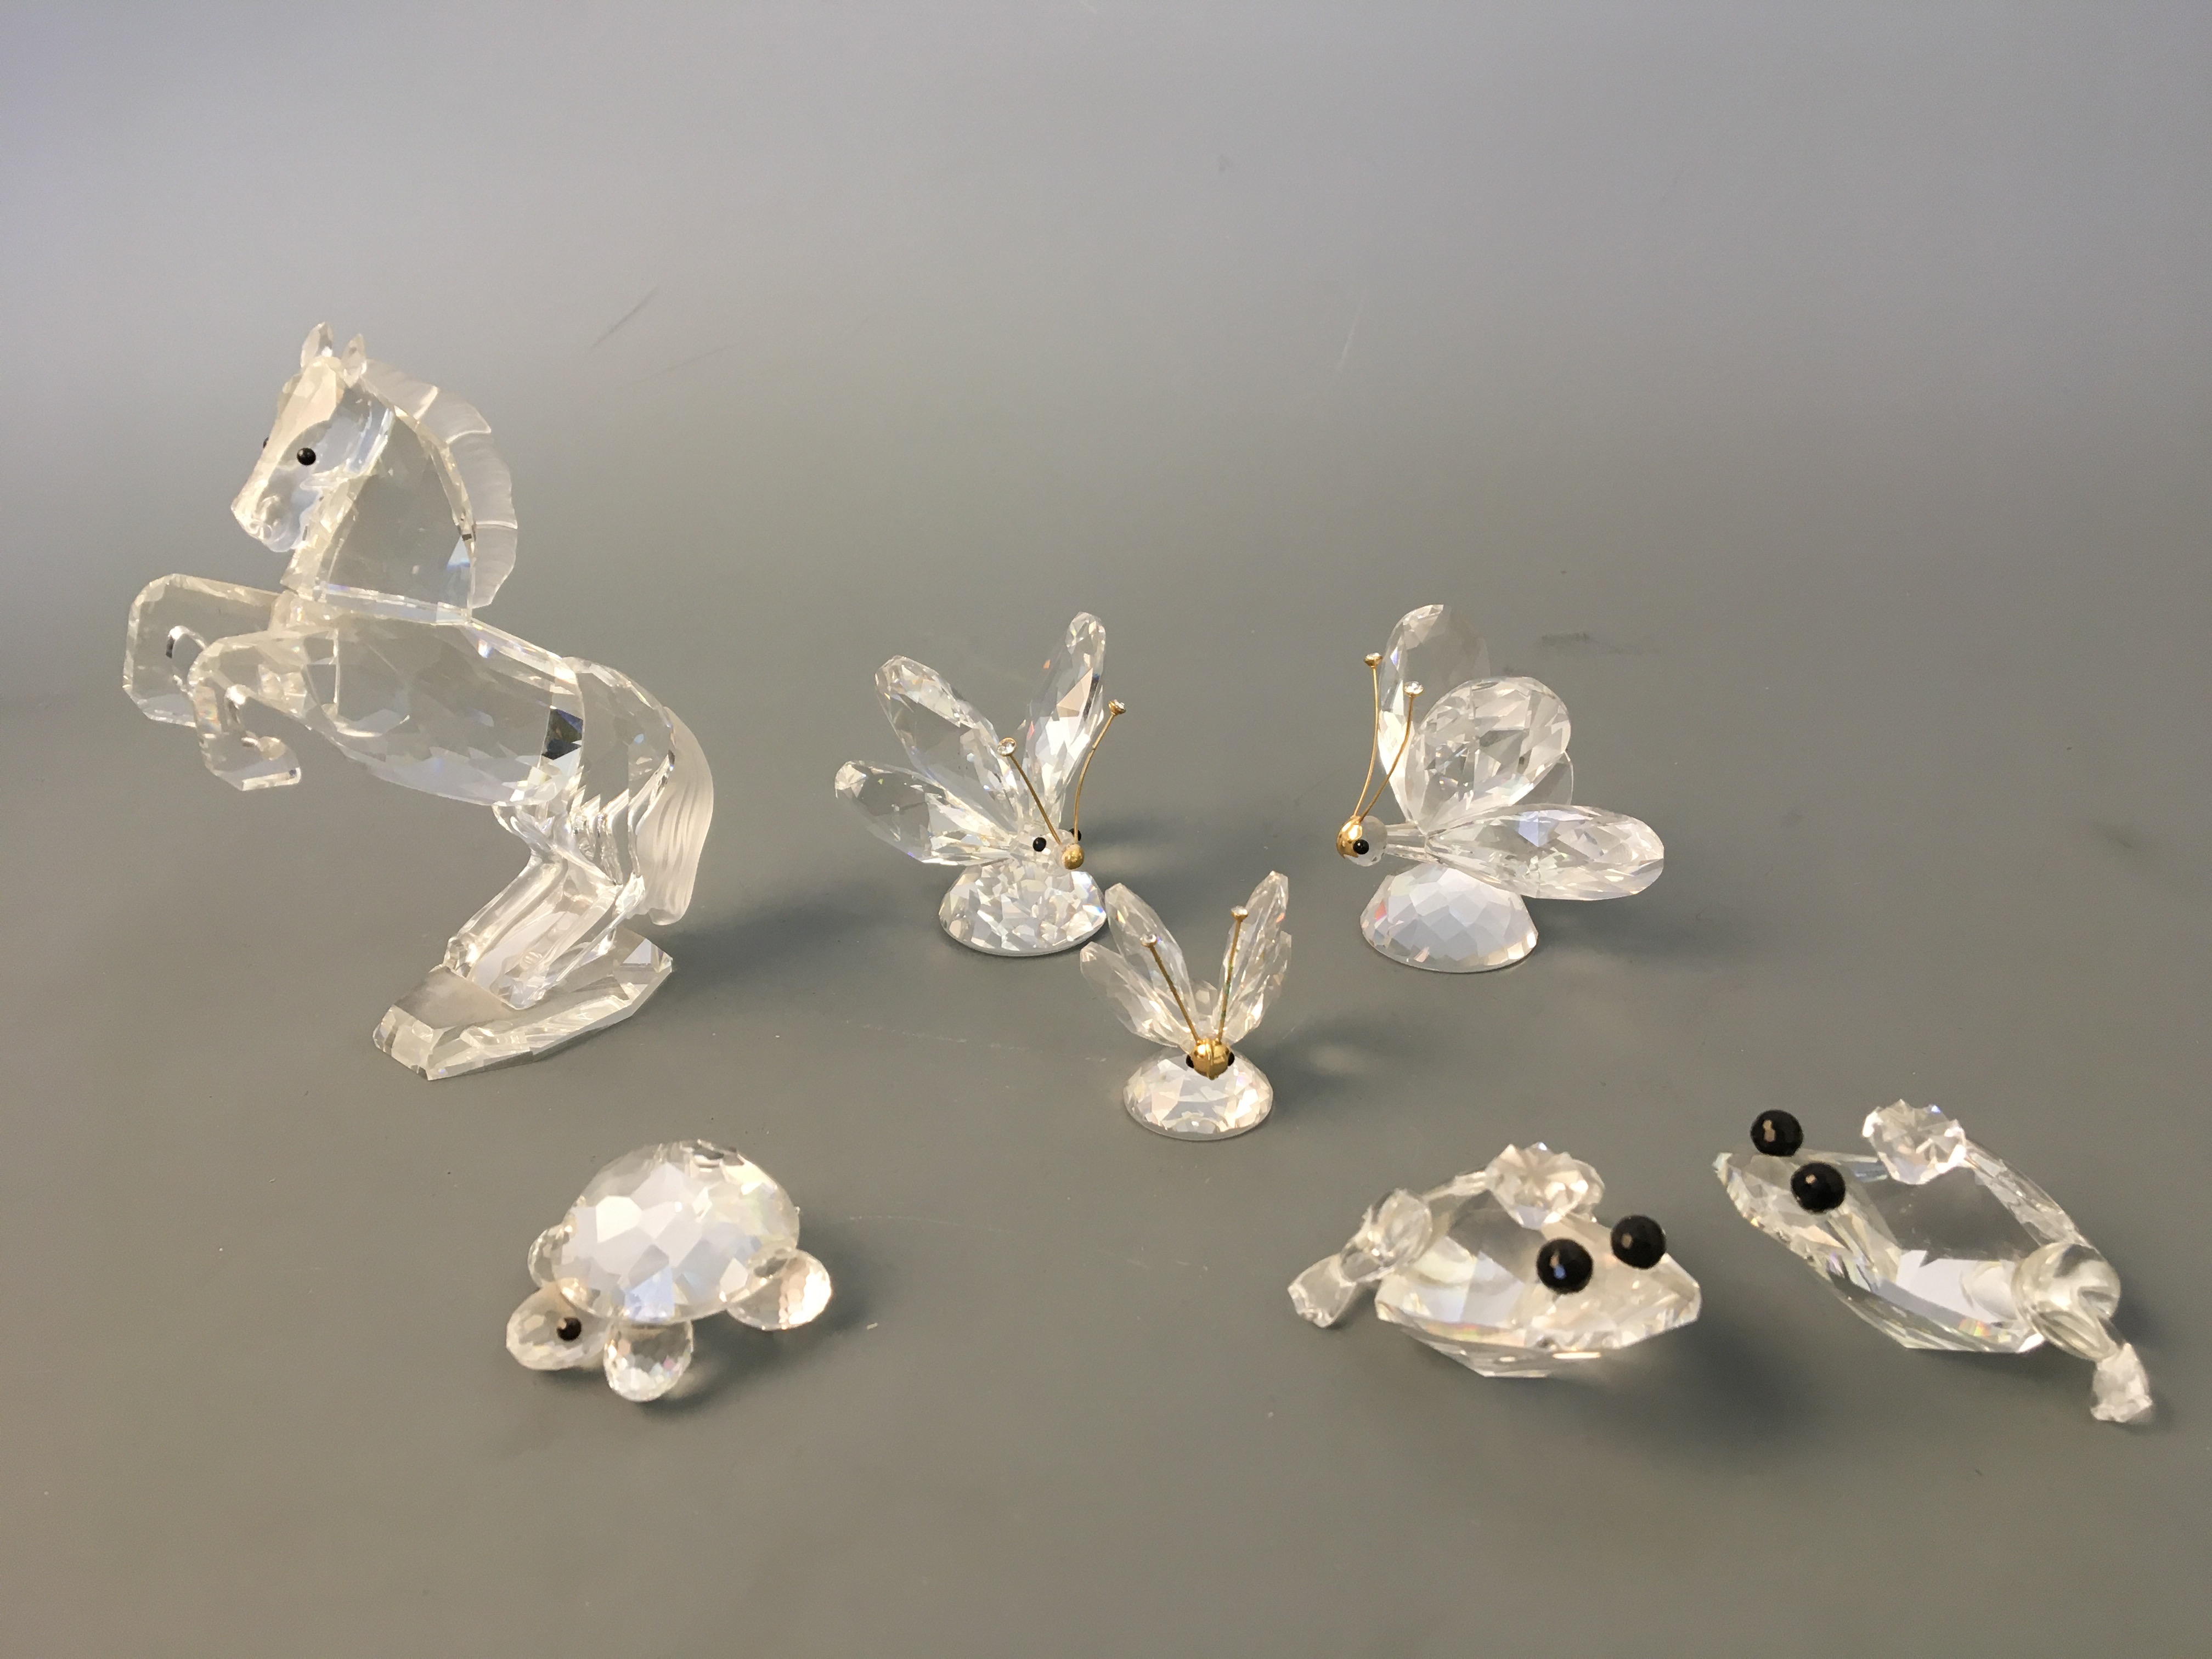 Three Swarovski butterflies, two frog prince, turtle and rearing horse, four boxed. IMPORTANT: